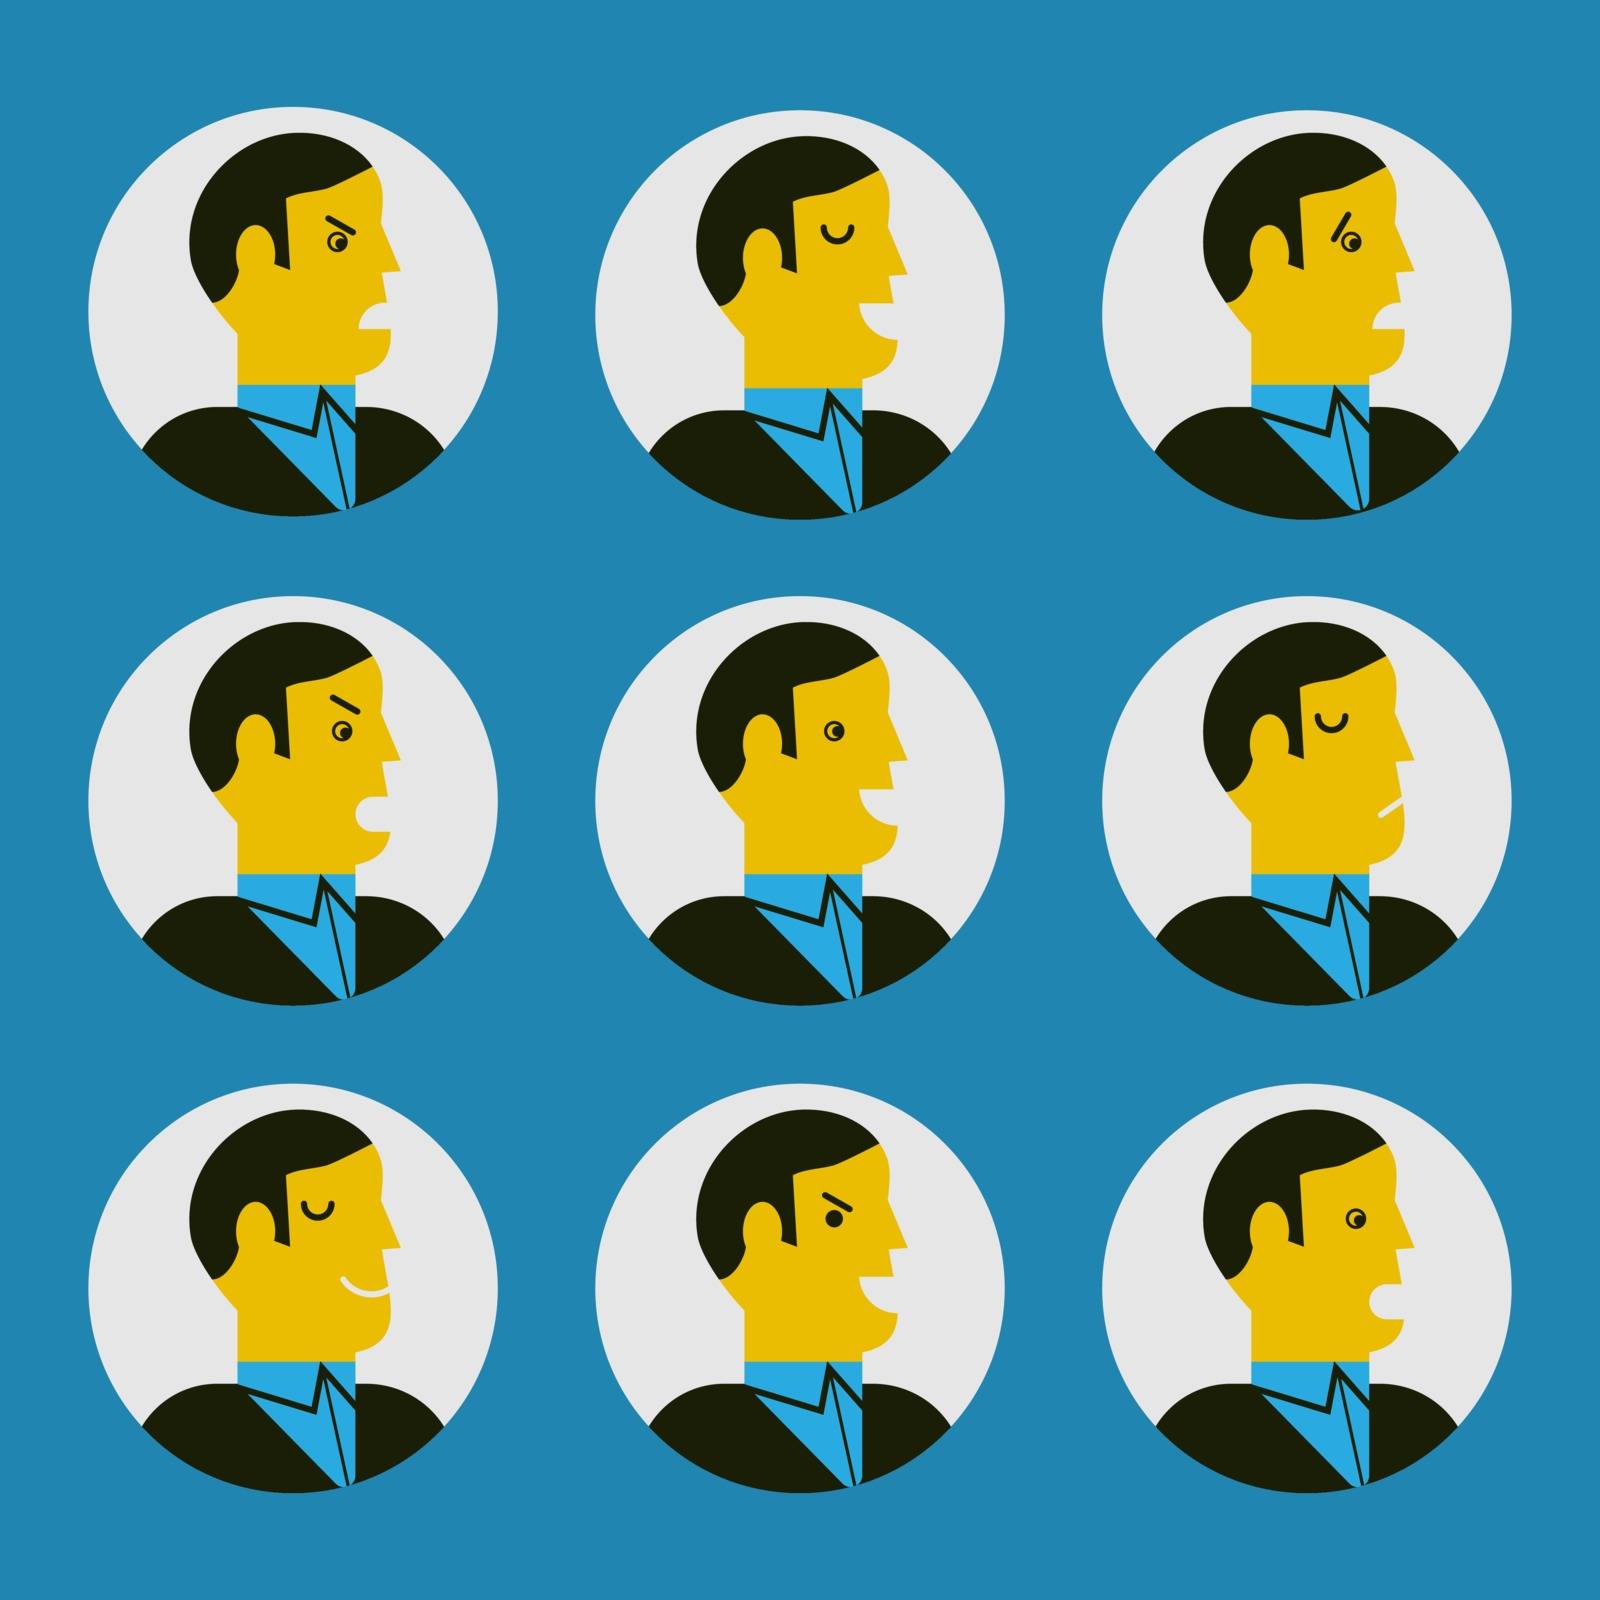 Vector illustration of various facial expressions. Flat design character set of boss or manager in various feeling and emotional expression concept. Negative, neutral and positive types of emotion.